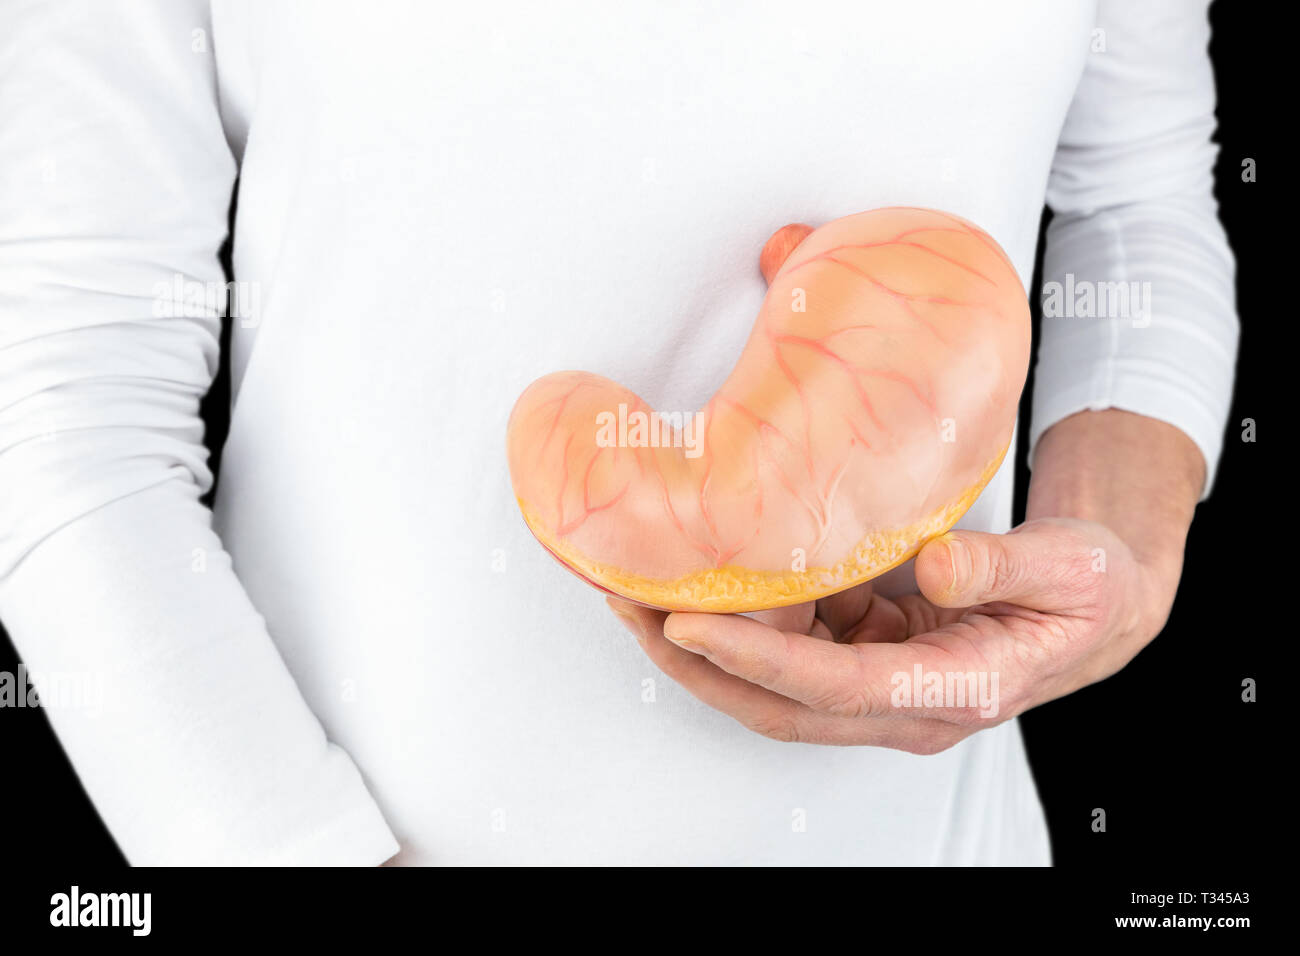 Hand holds demo model of human stomach at white body with black background Stock Photo